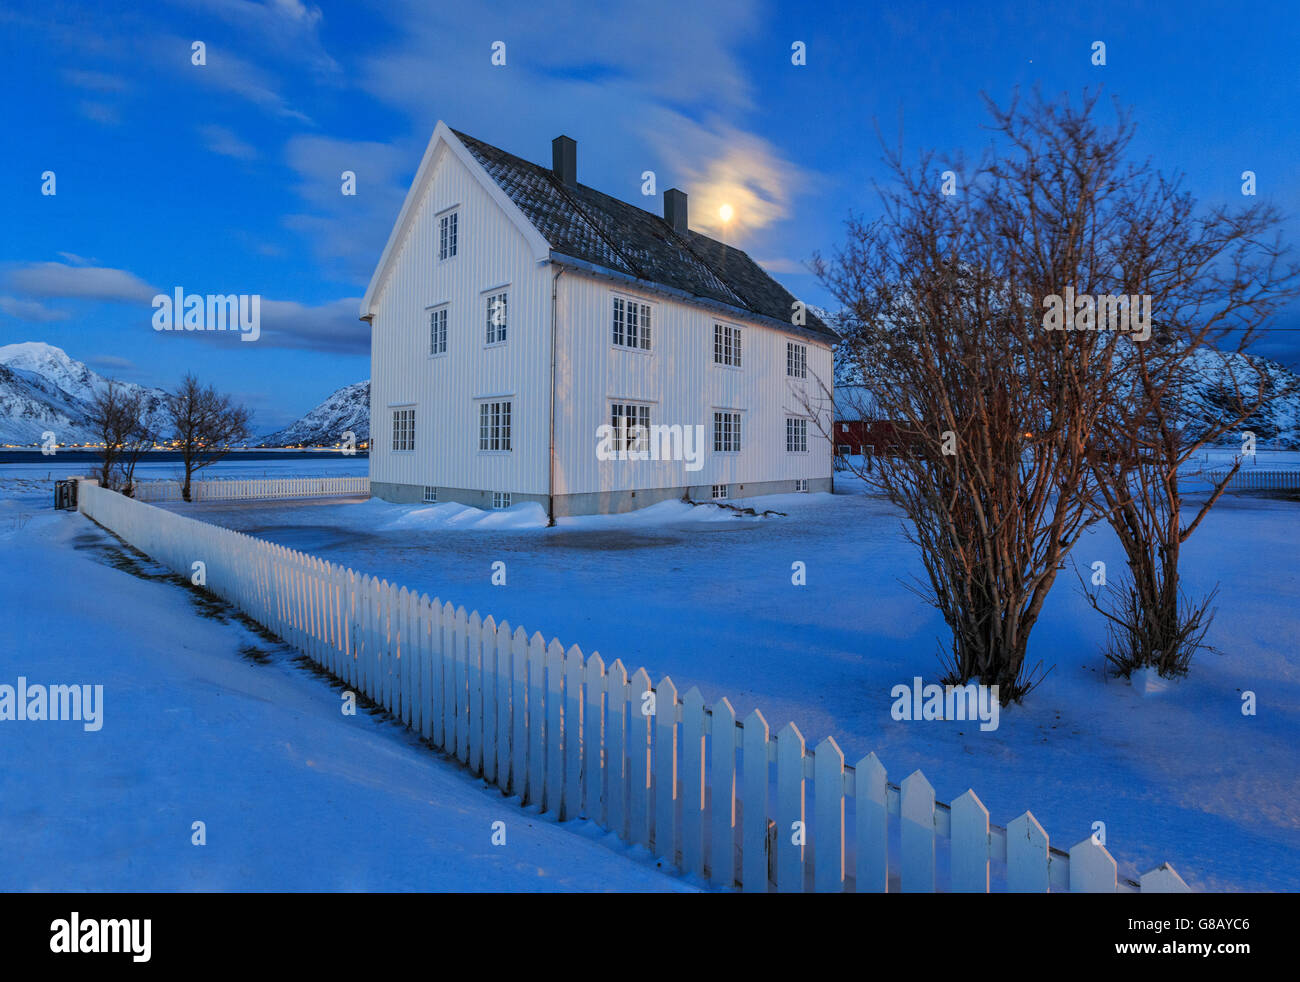 Typical house surrounded by snow in a cold winter day at dusk Flakstad Lofoten Islands Norway Europe Stock Photo